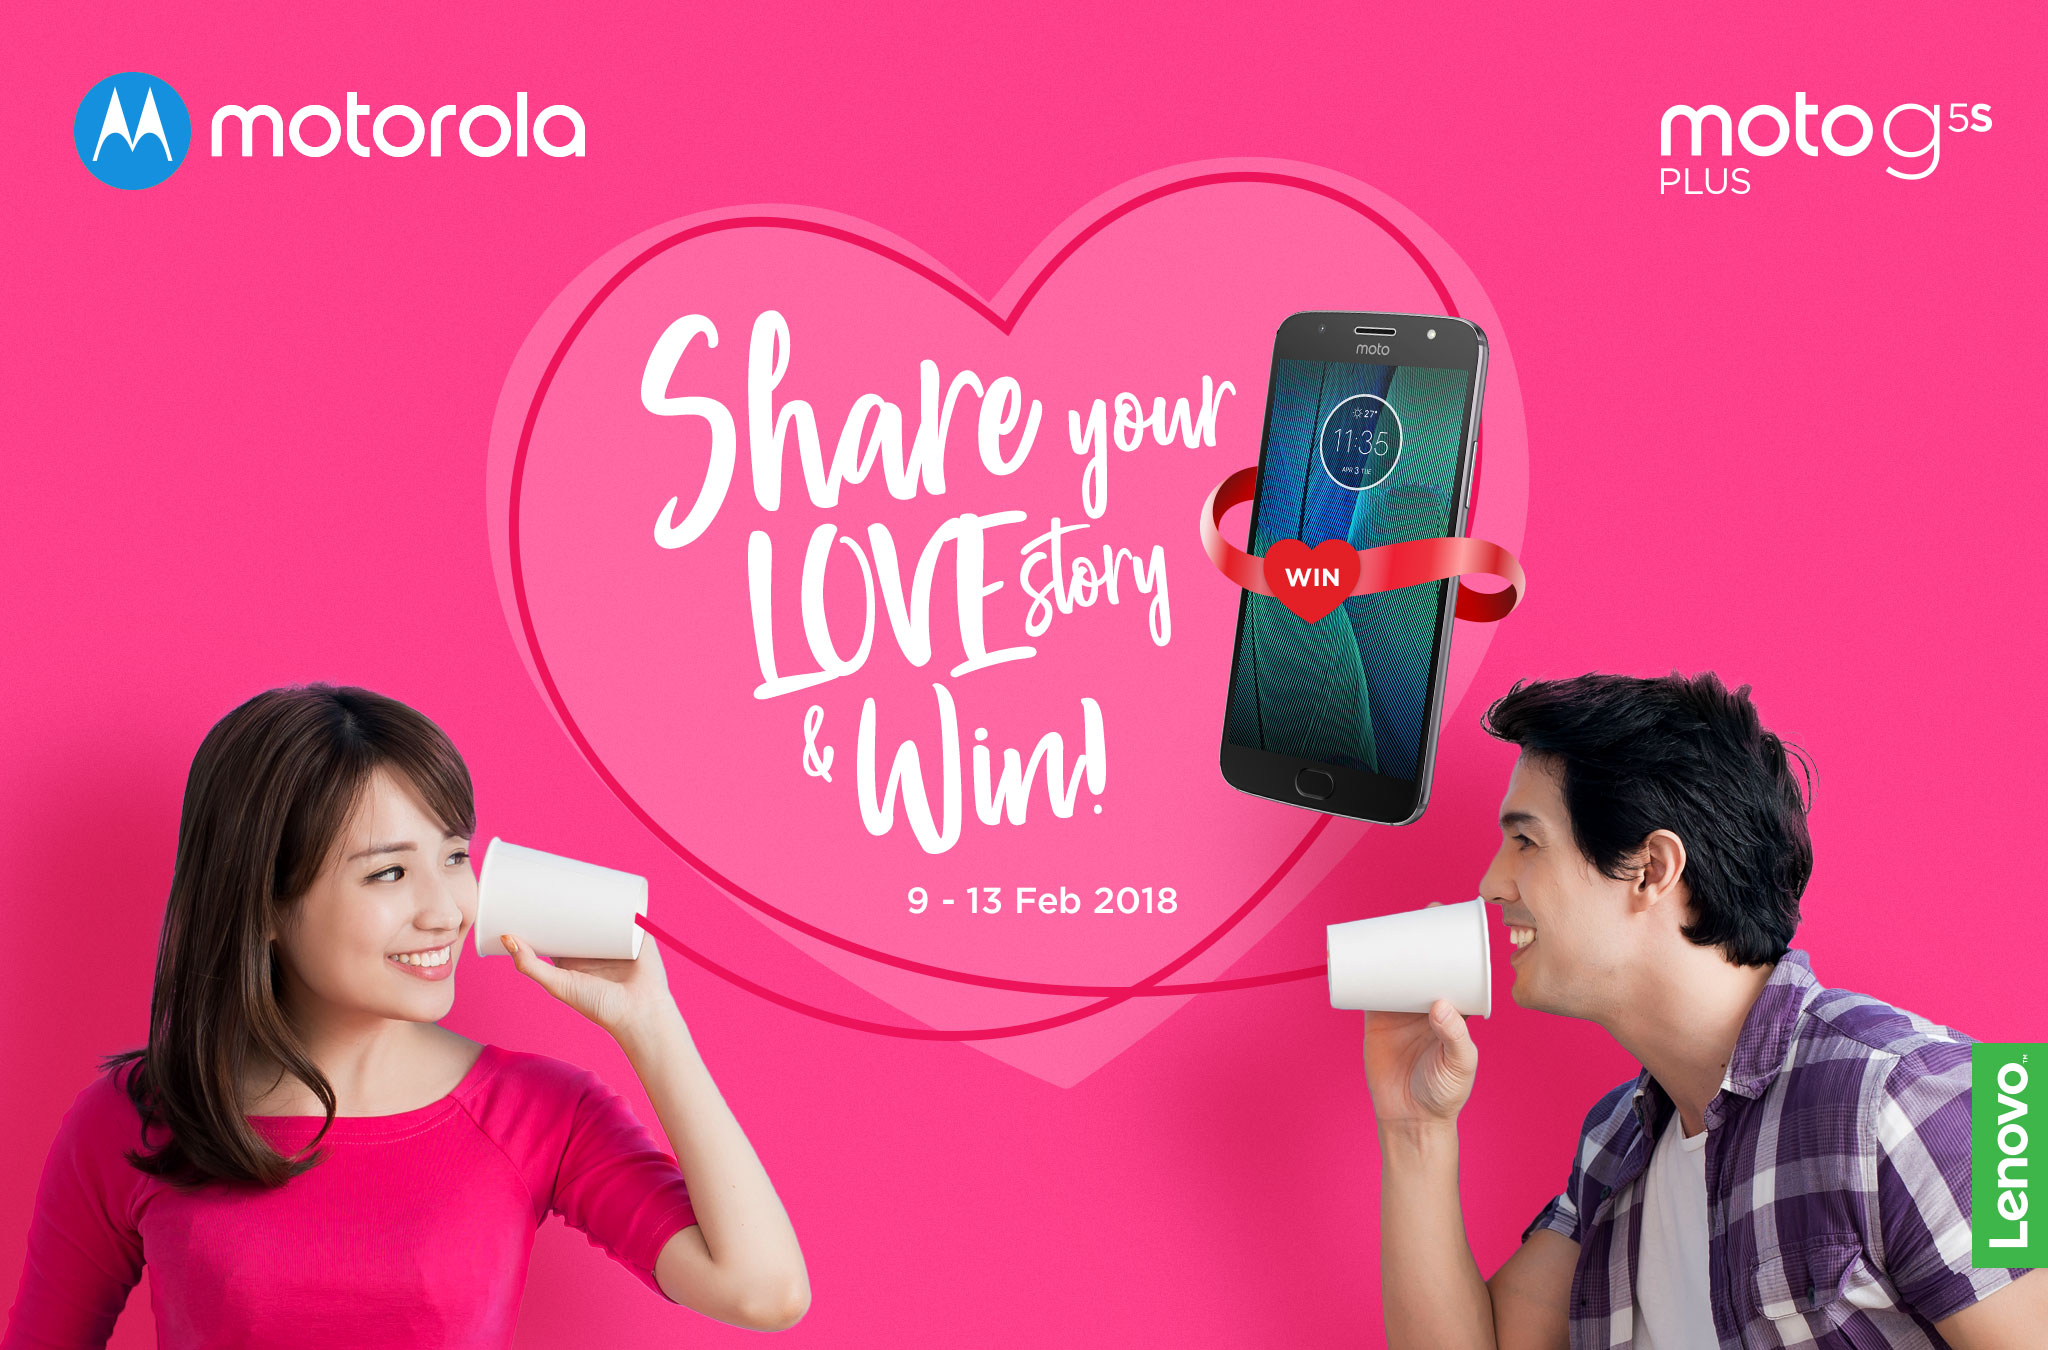 Share your love story online and stand a chance to win a free Moto G5S Plus